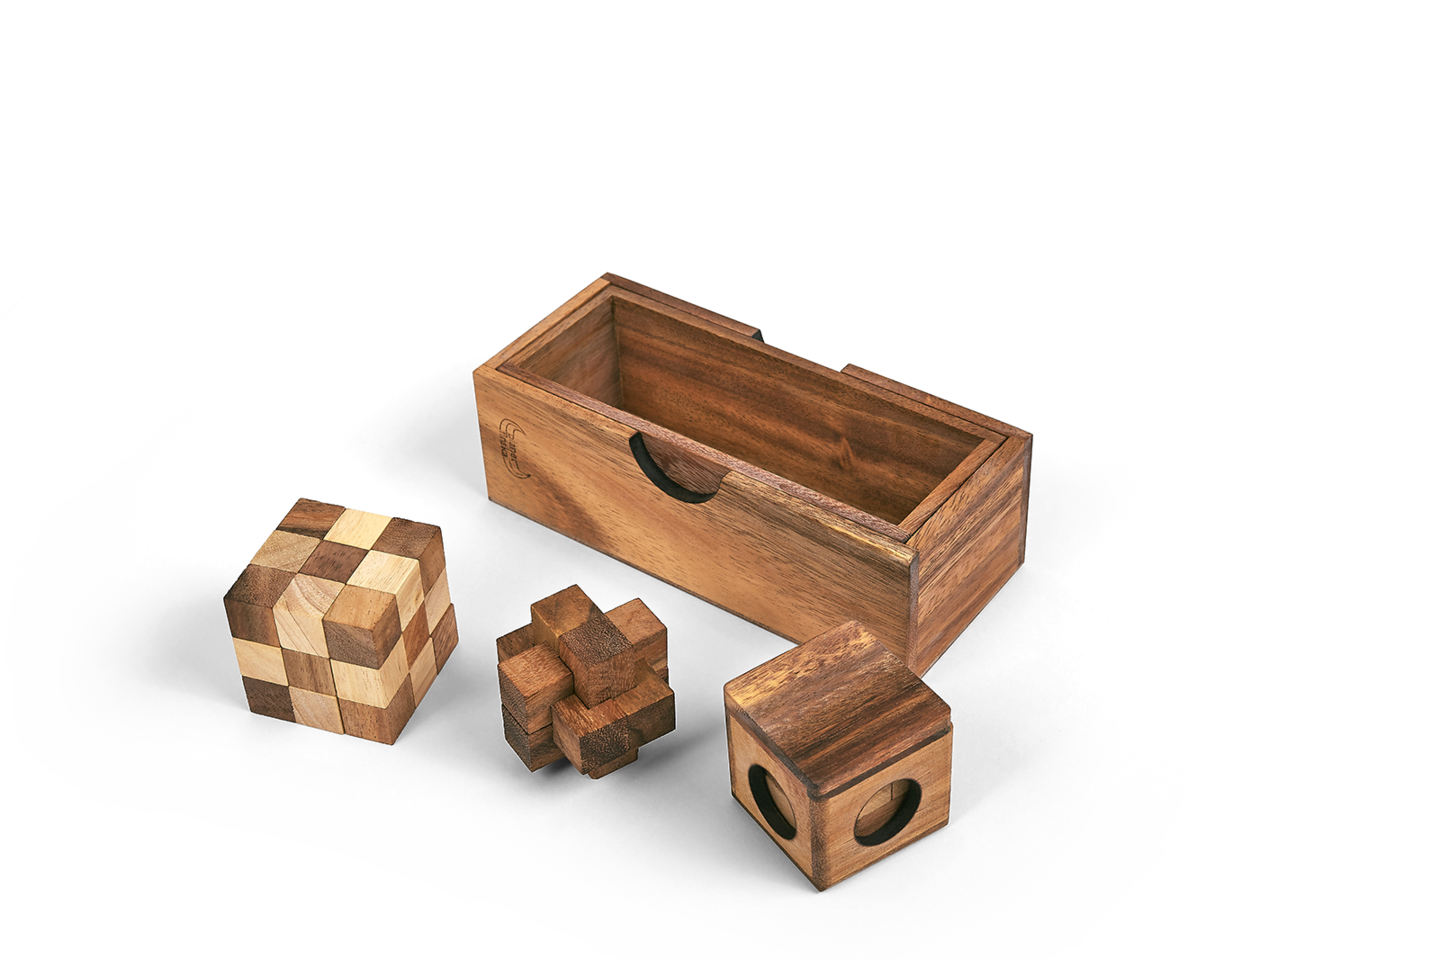 3 Puzzles In A Wooden Box